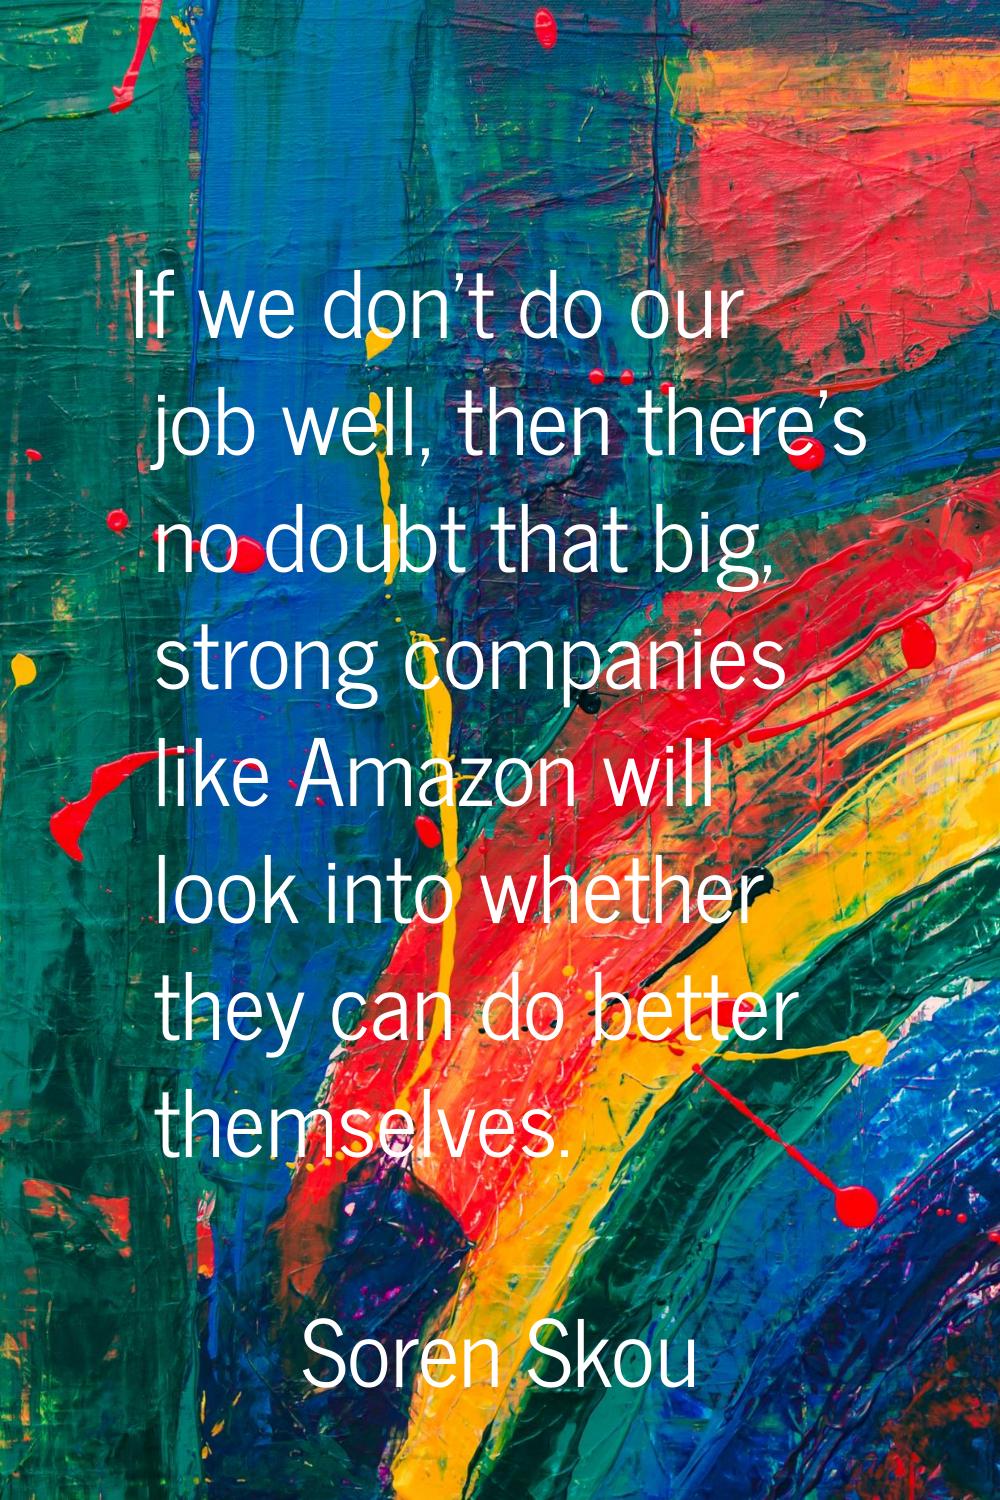 If we don't do our job well, then there's no doubt that big, strong companies like Amazon will look